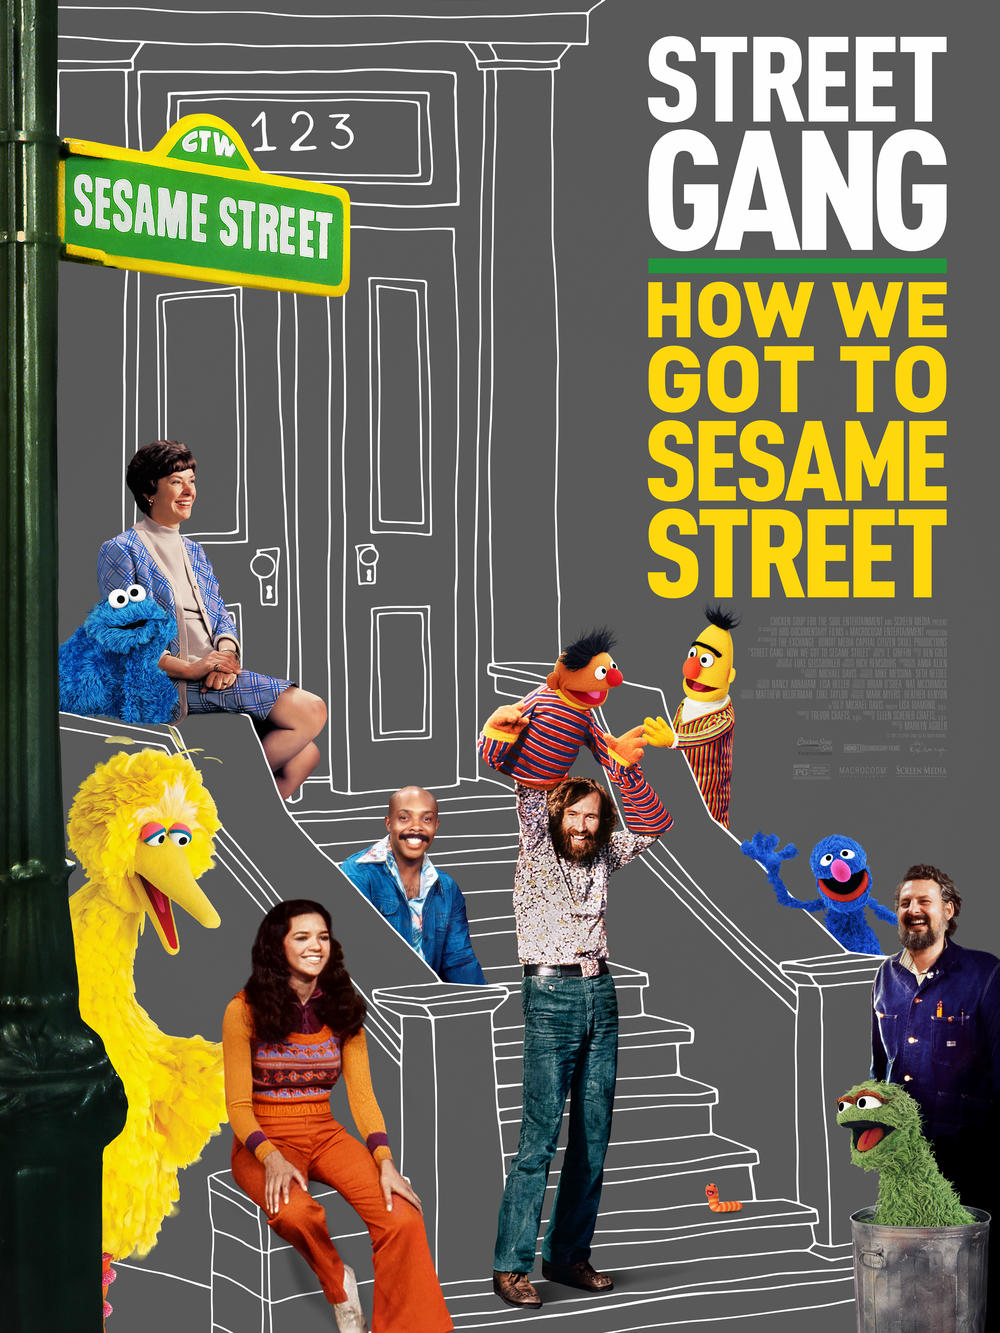 <em>Street Gang: How We Got To Sesame Street</em> is in theaters and on demand now.